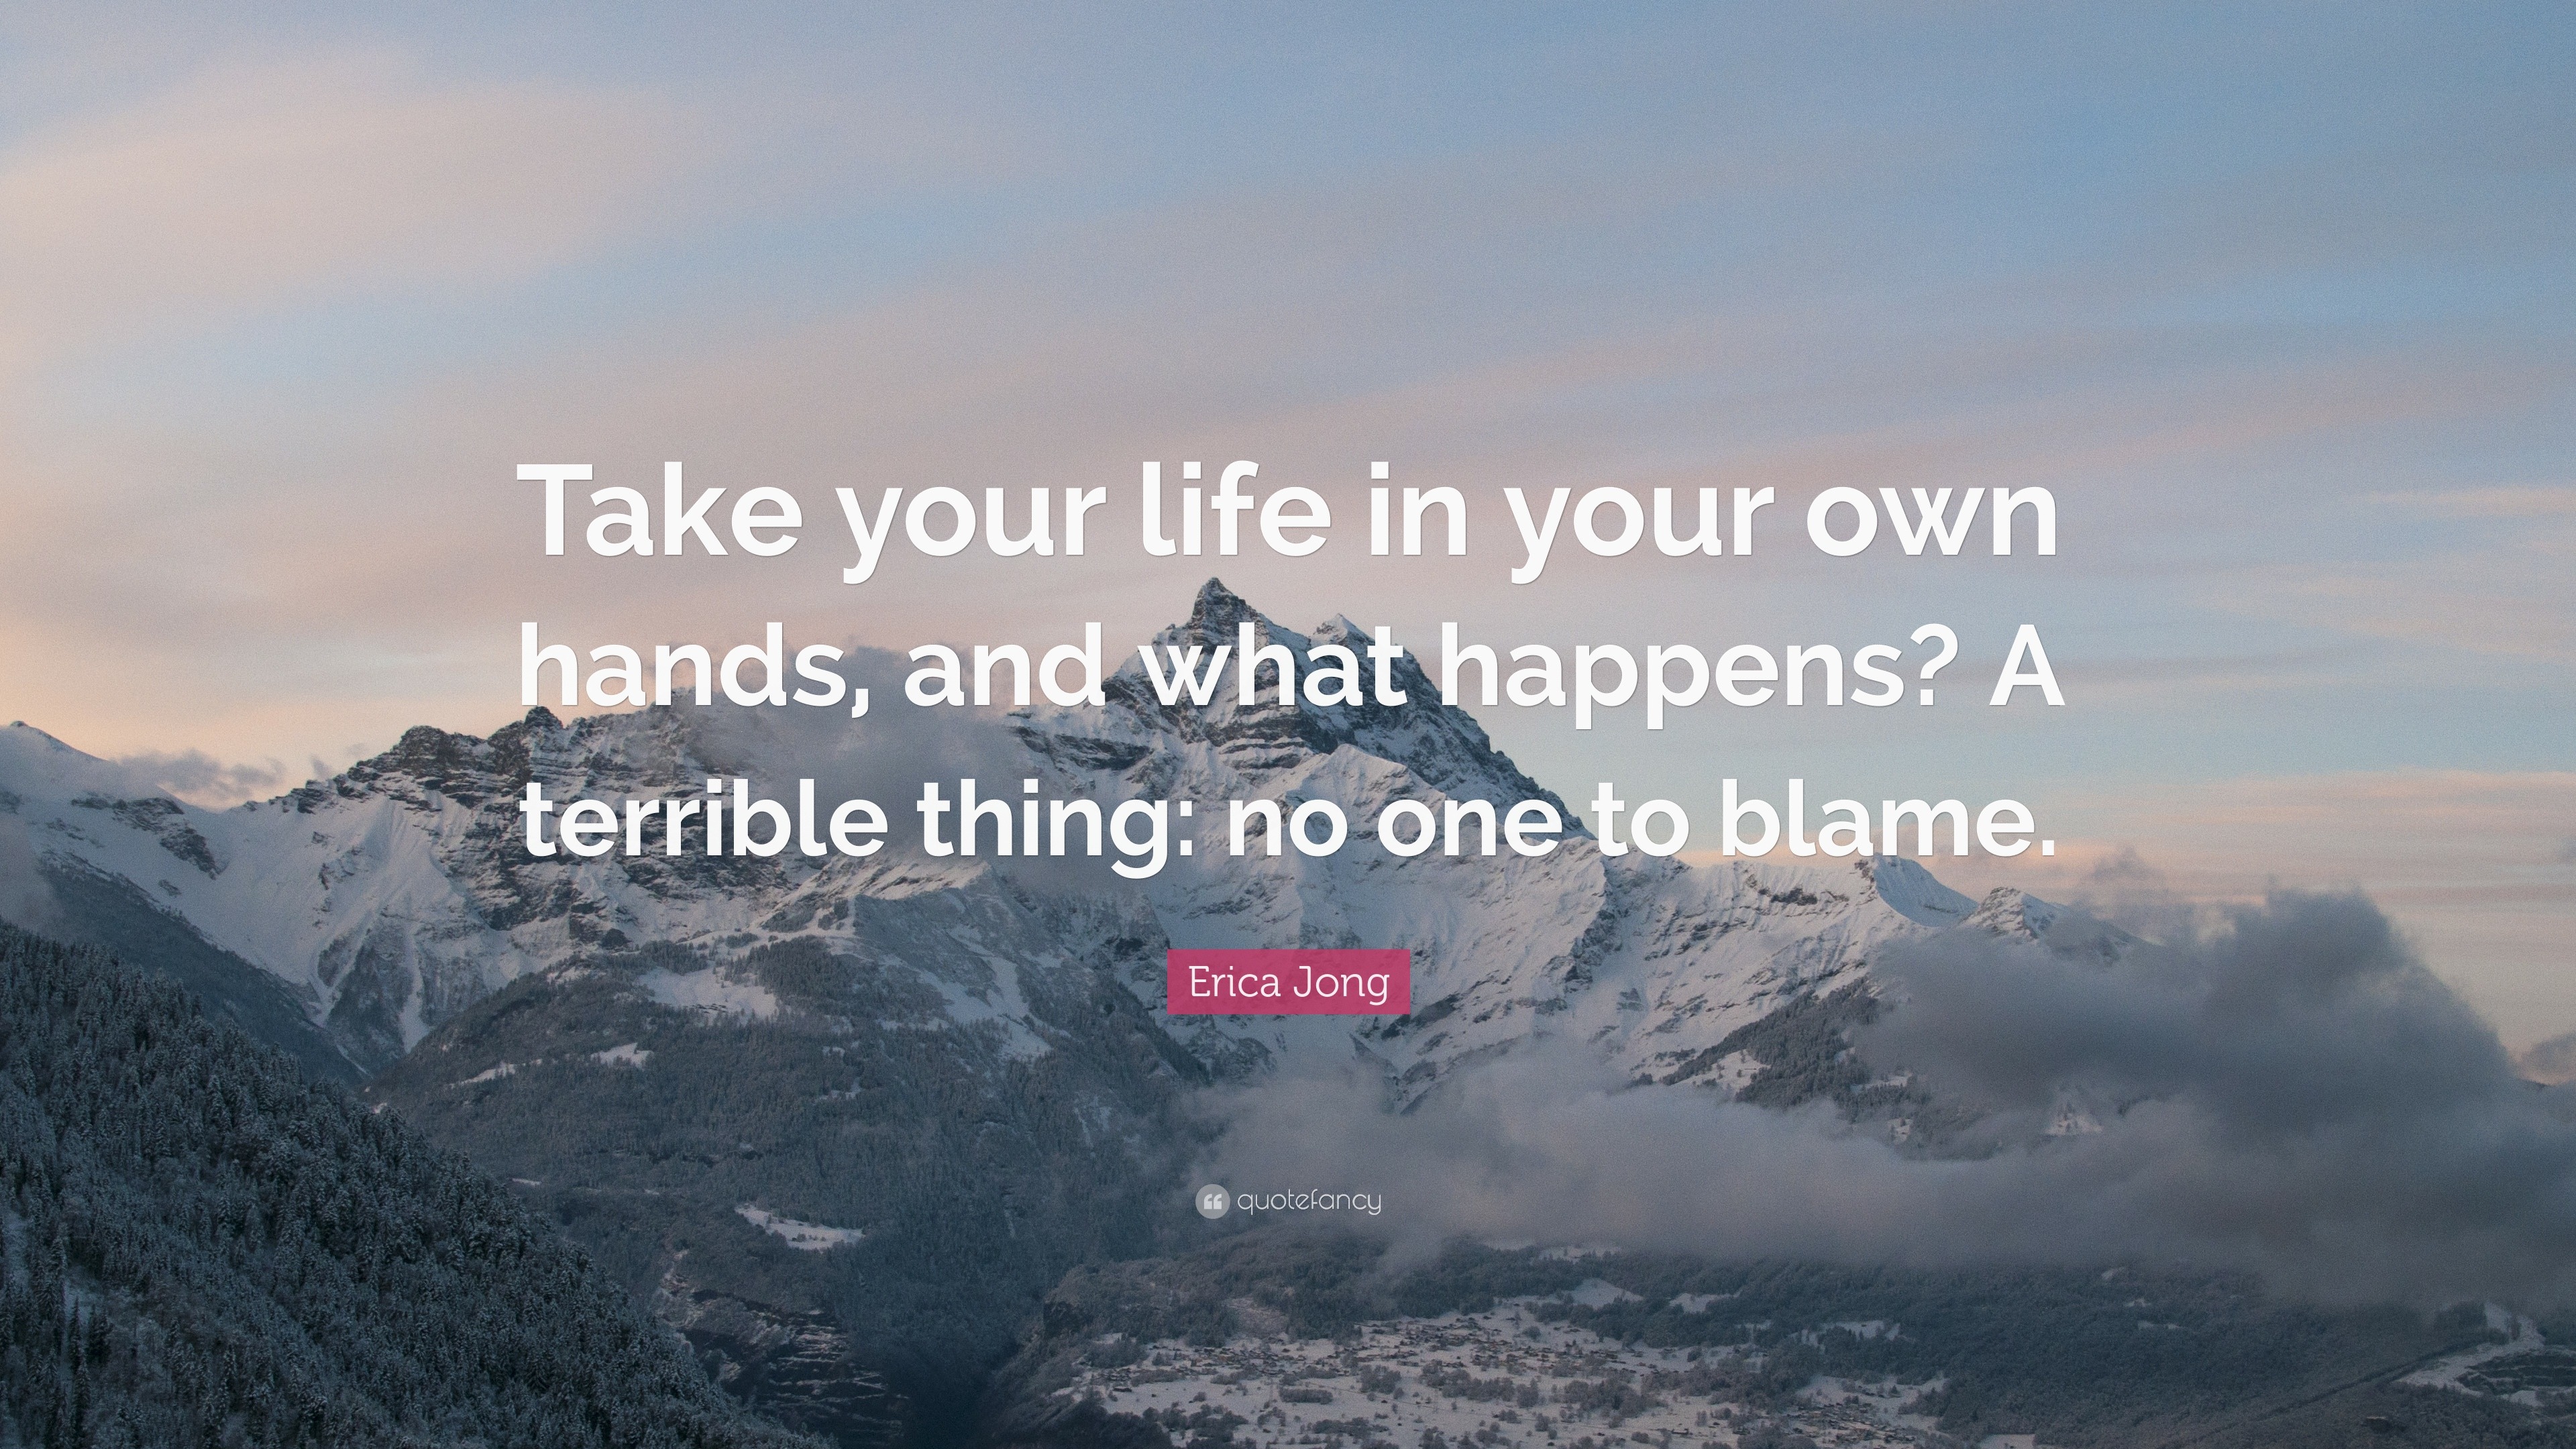 Erica Jong Quote Take Your Life In Your Own Hands And What Happens A Terrible Thing